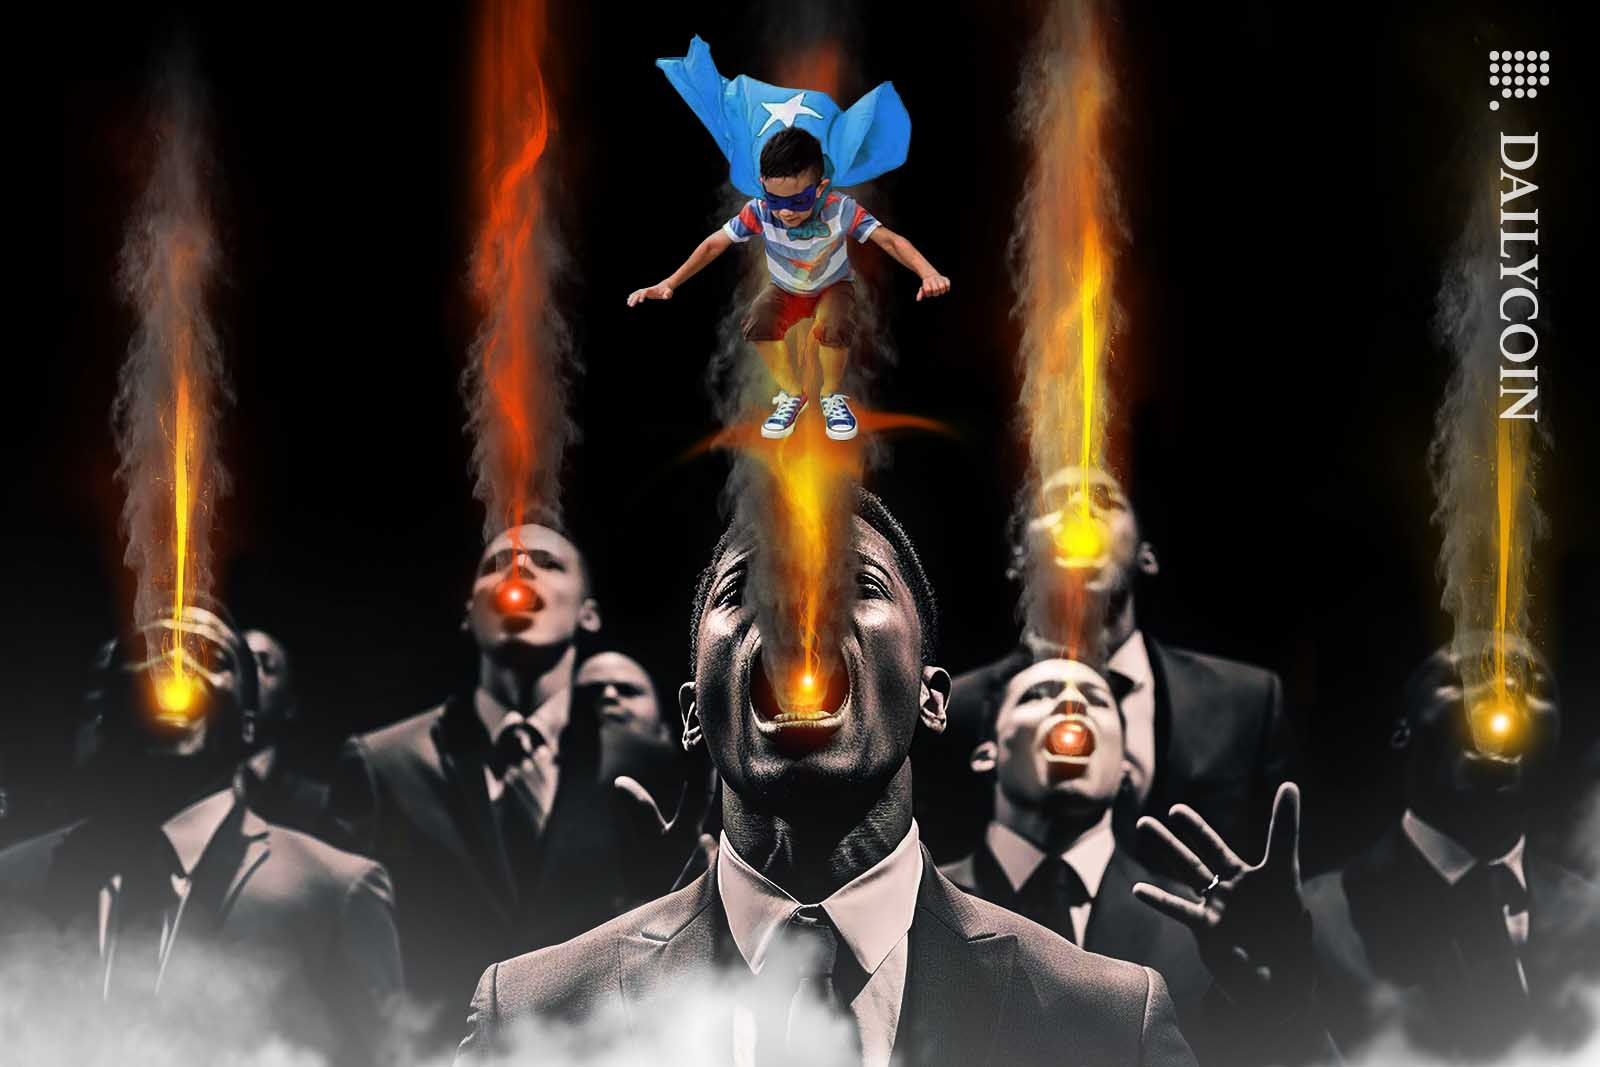 Evil suited man spitting fire upwards as a small superhero kid surfing on the flames unfazed.